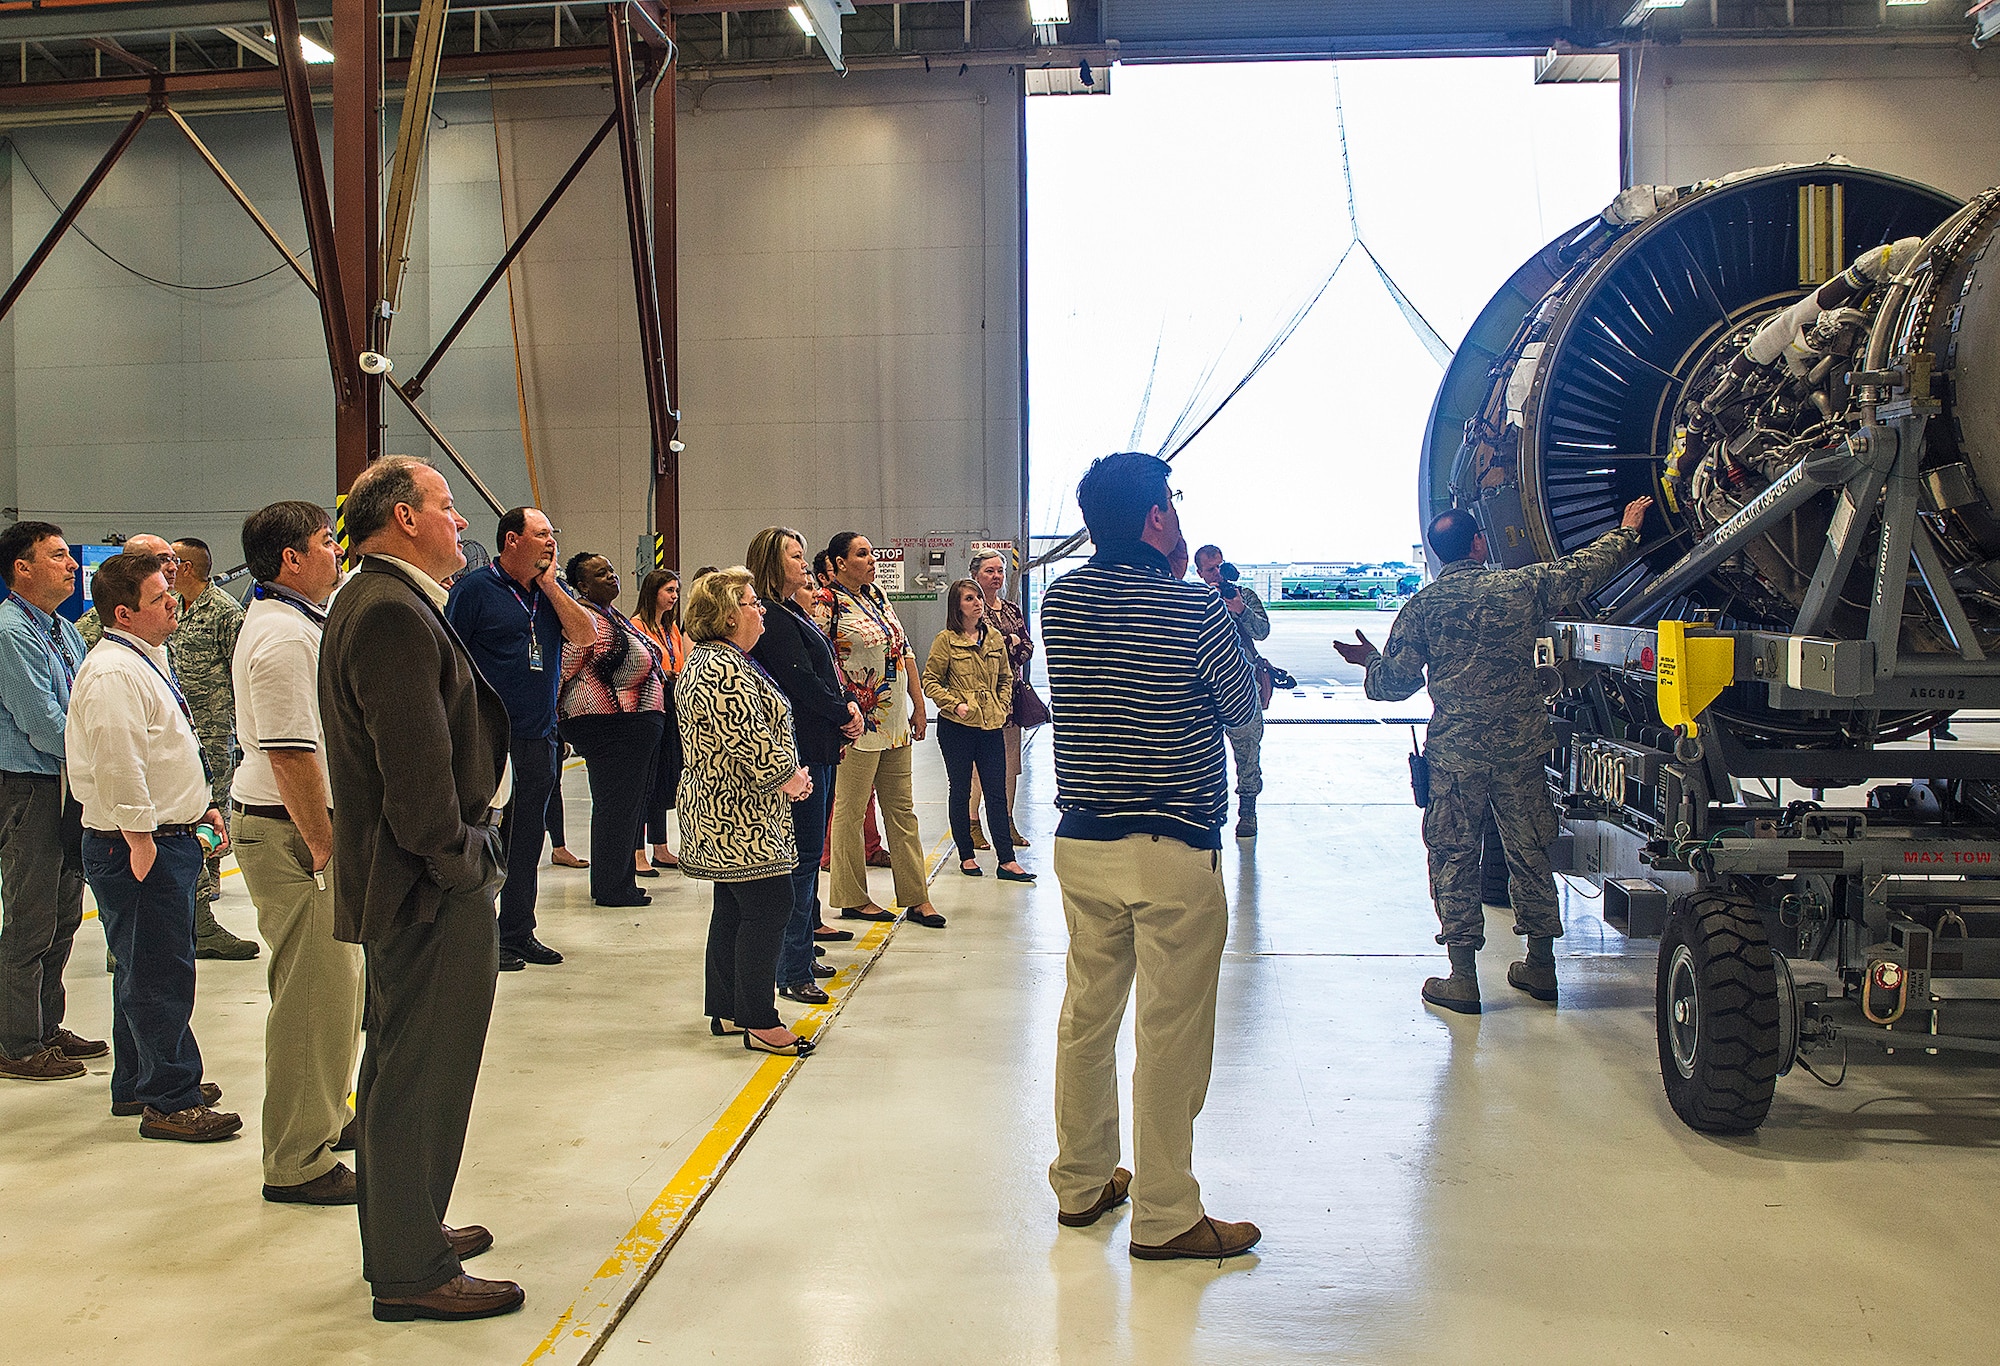 Tech. Sgt. Sean Preston, 433rd Maintenance Squadron aircraft mechanic, explains the benefits of the new C-5M engines to civic leaders from the 403rd Wing, Keesler Air Force Base, Mississippi March 24, 2017 at Joint Base San Antonio-Lackland, Texas. (U.S. Air Force photo by Benjamin Faske)